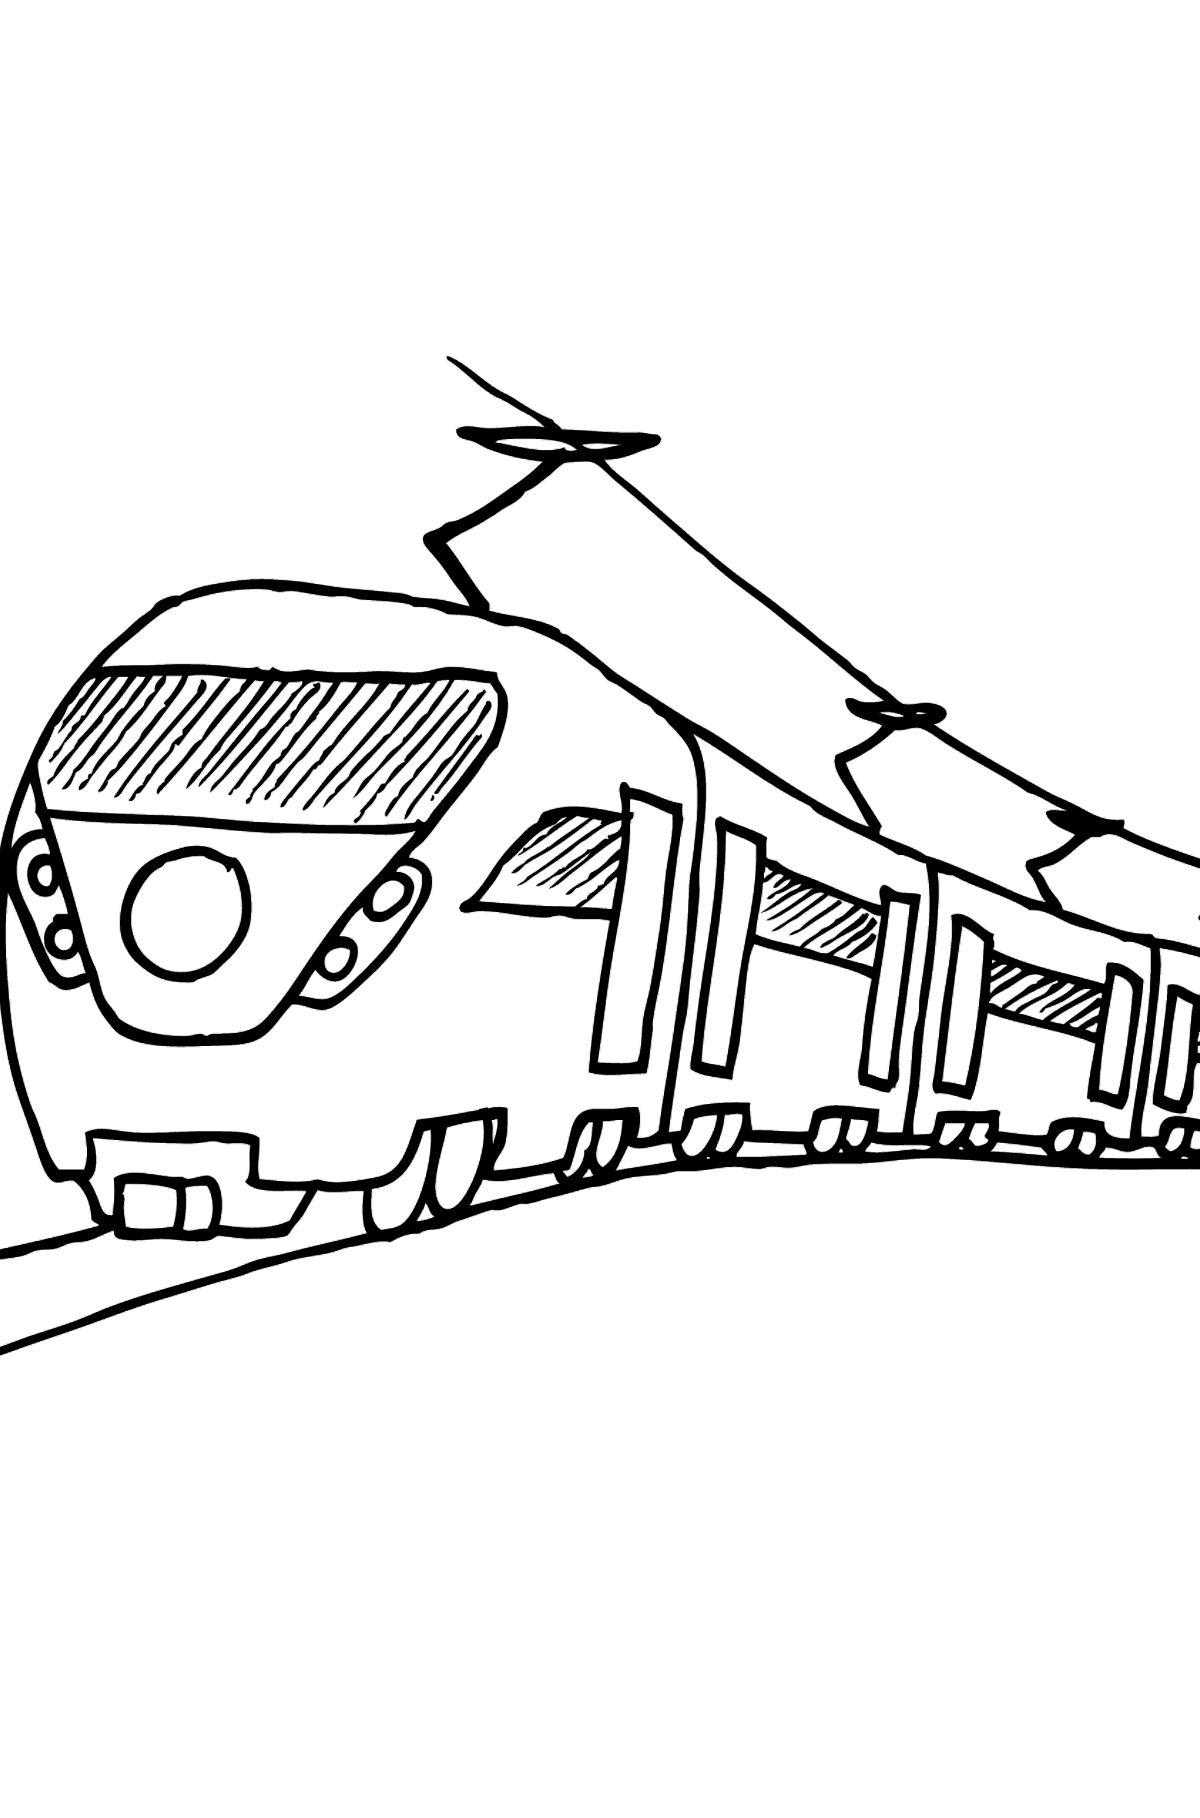 Coloring Page - A Passenger Train - Coloring Pages for Kids